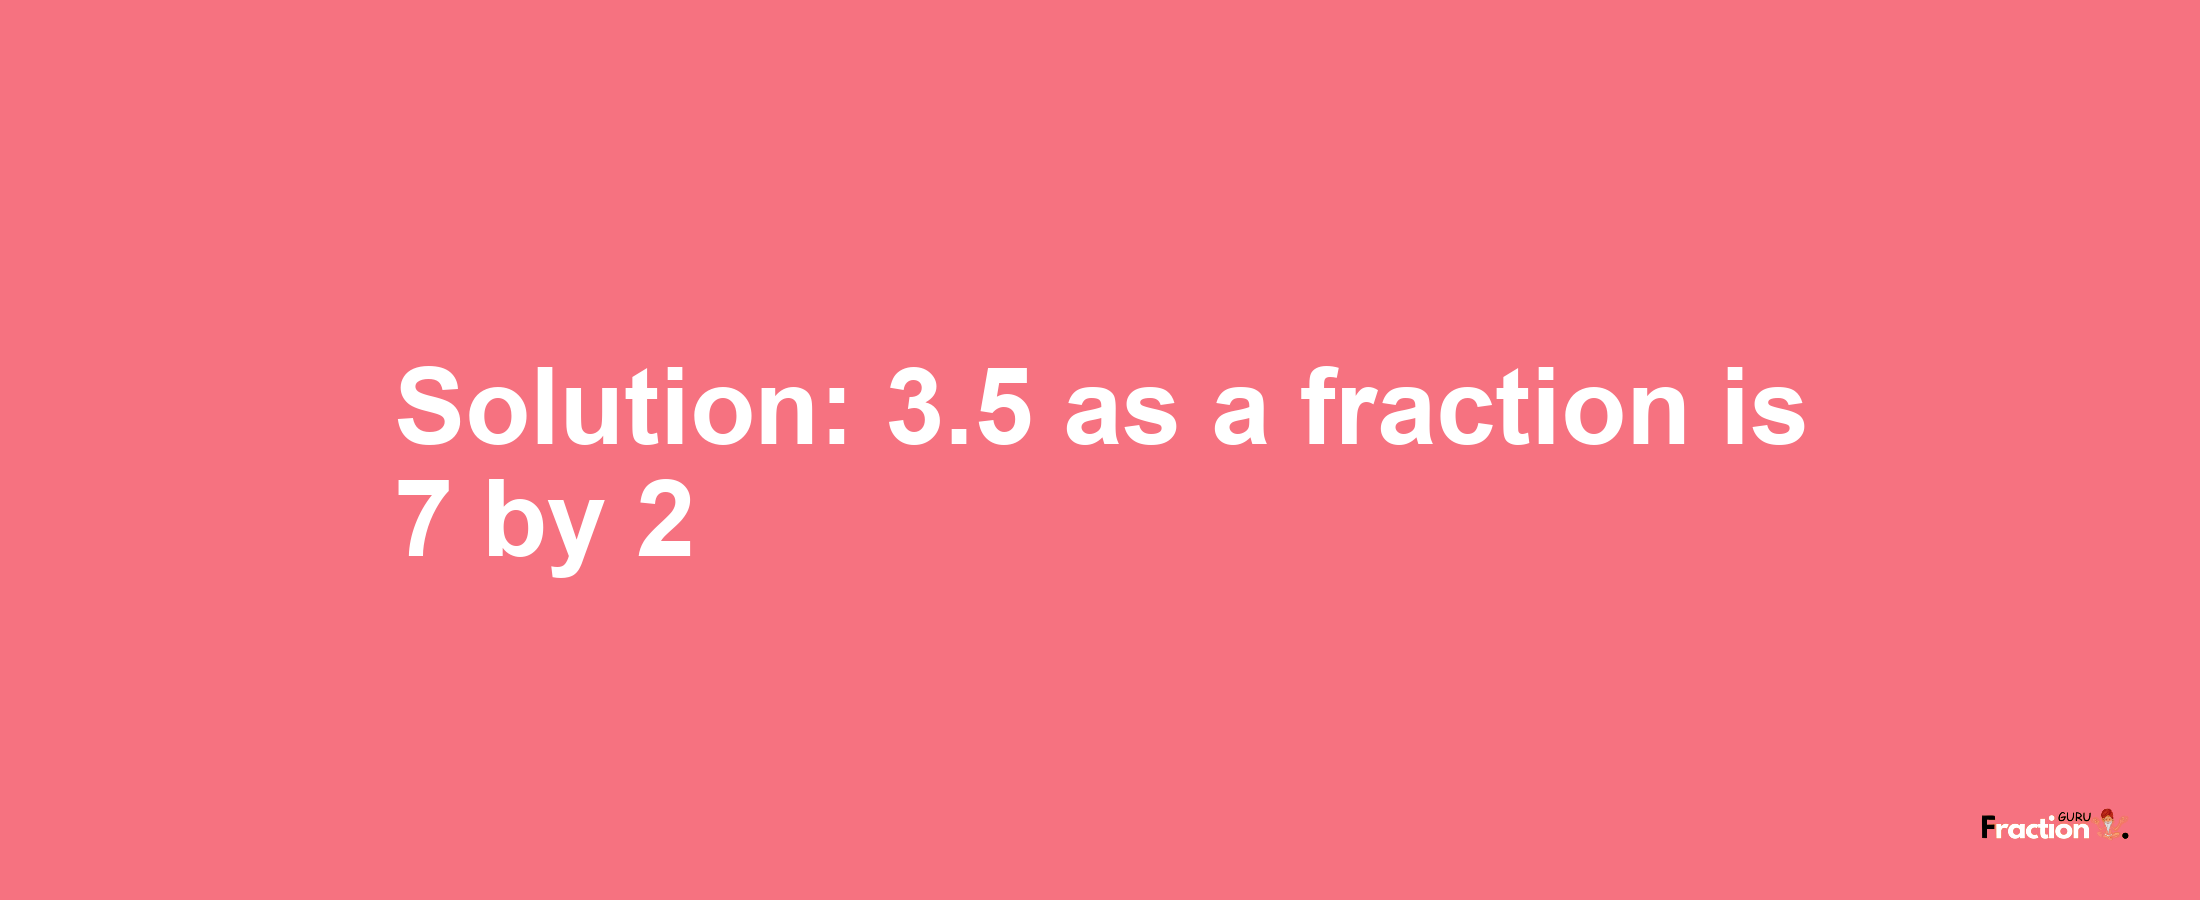 Solution:3.5 as a fraction is 7/2